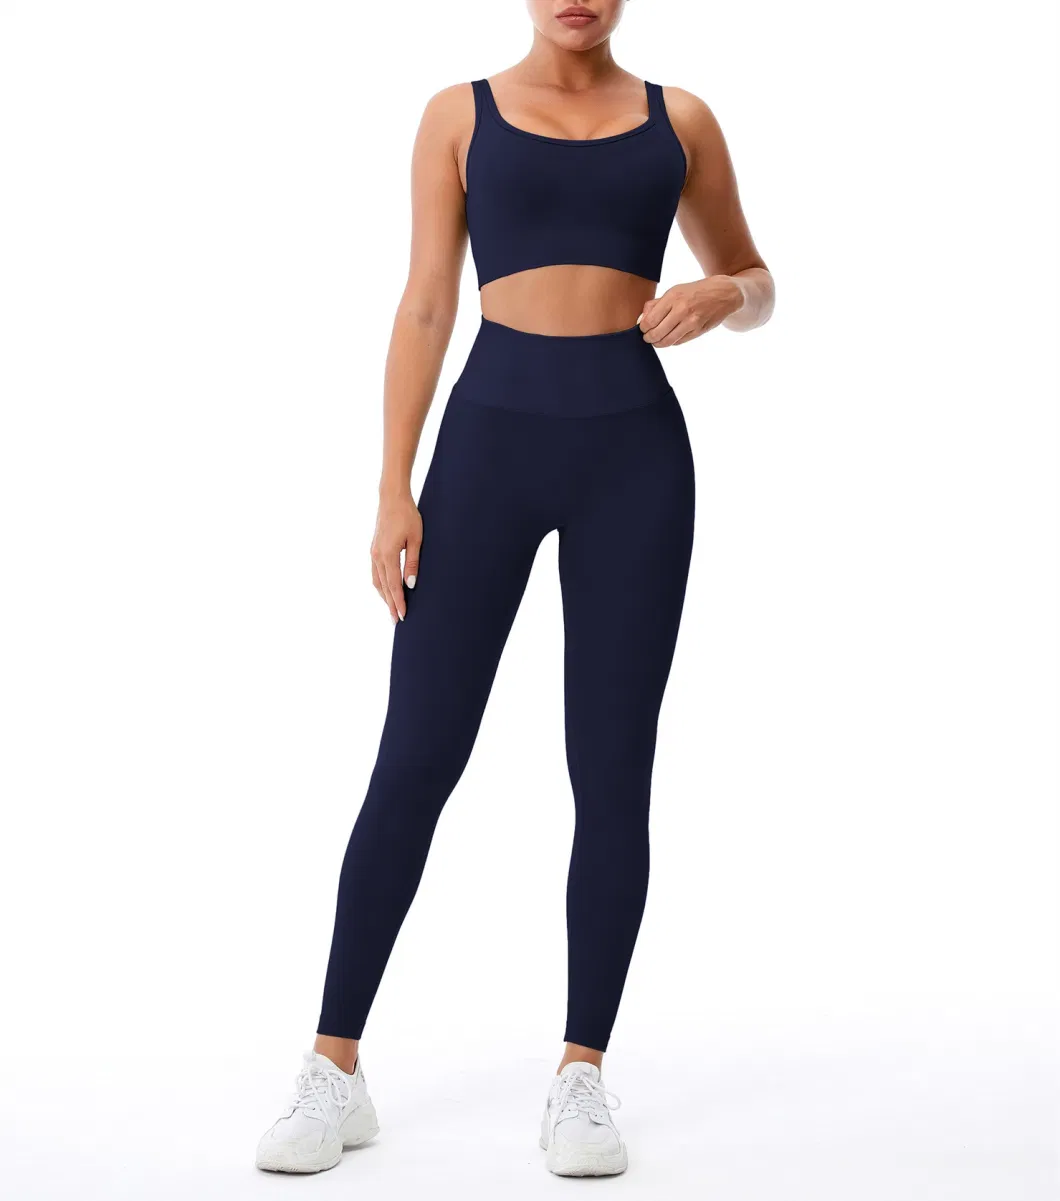 Women&prime; S Stretchable Breathable Exercise Yoga Gym Workout Fitness Sport Suit Wear Cloth Tracksuits Set of Sports Bra and Leggings